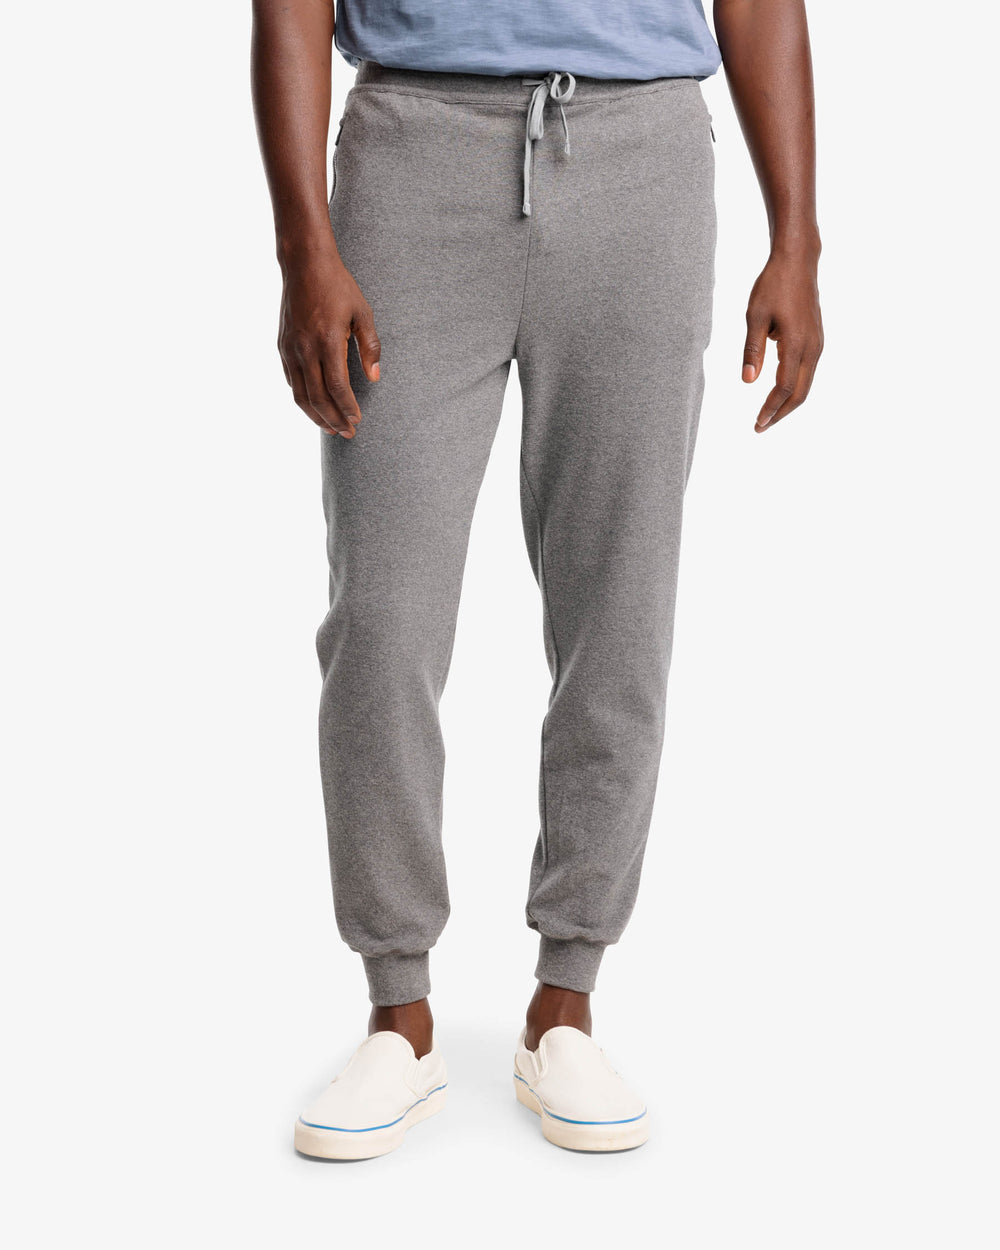 The front view of the Backrush Heather Jogger by Southern Tide - Heather Steel Grey